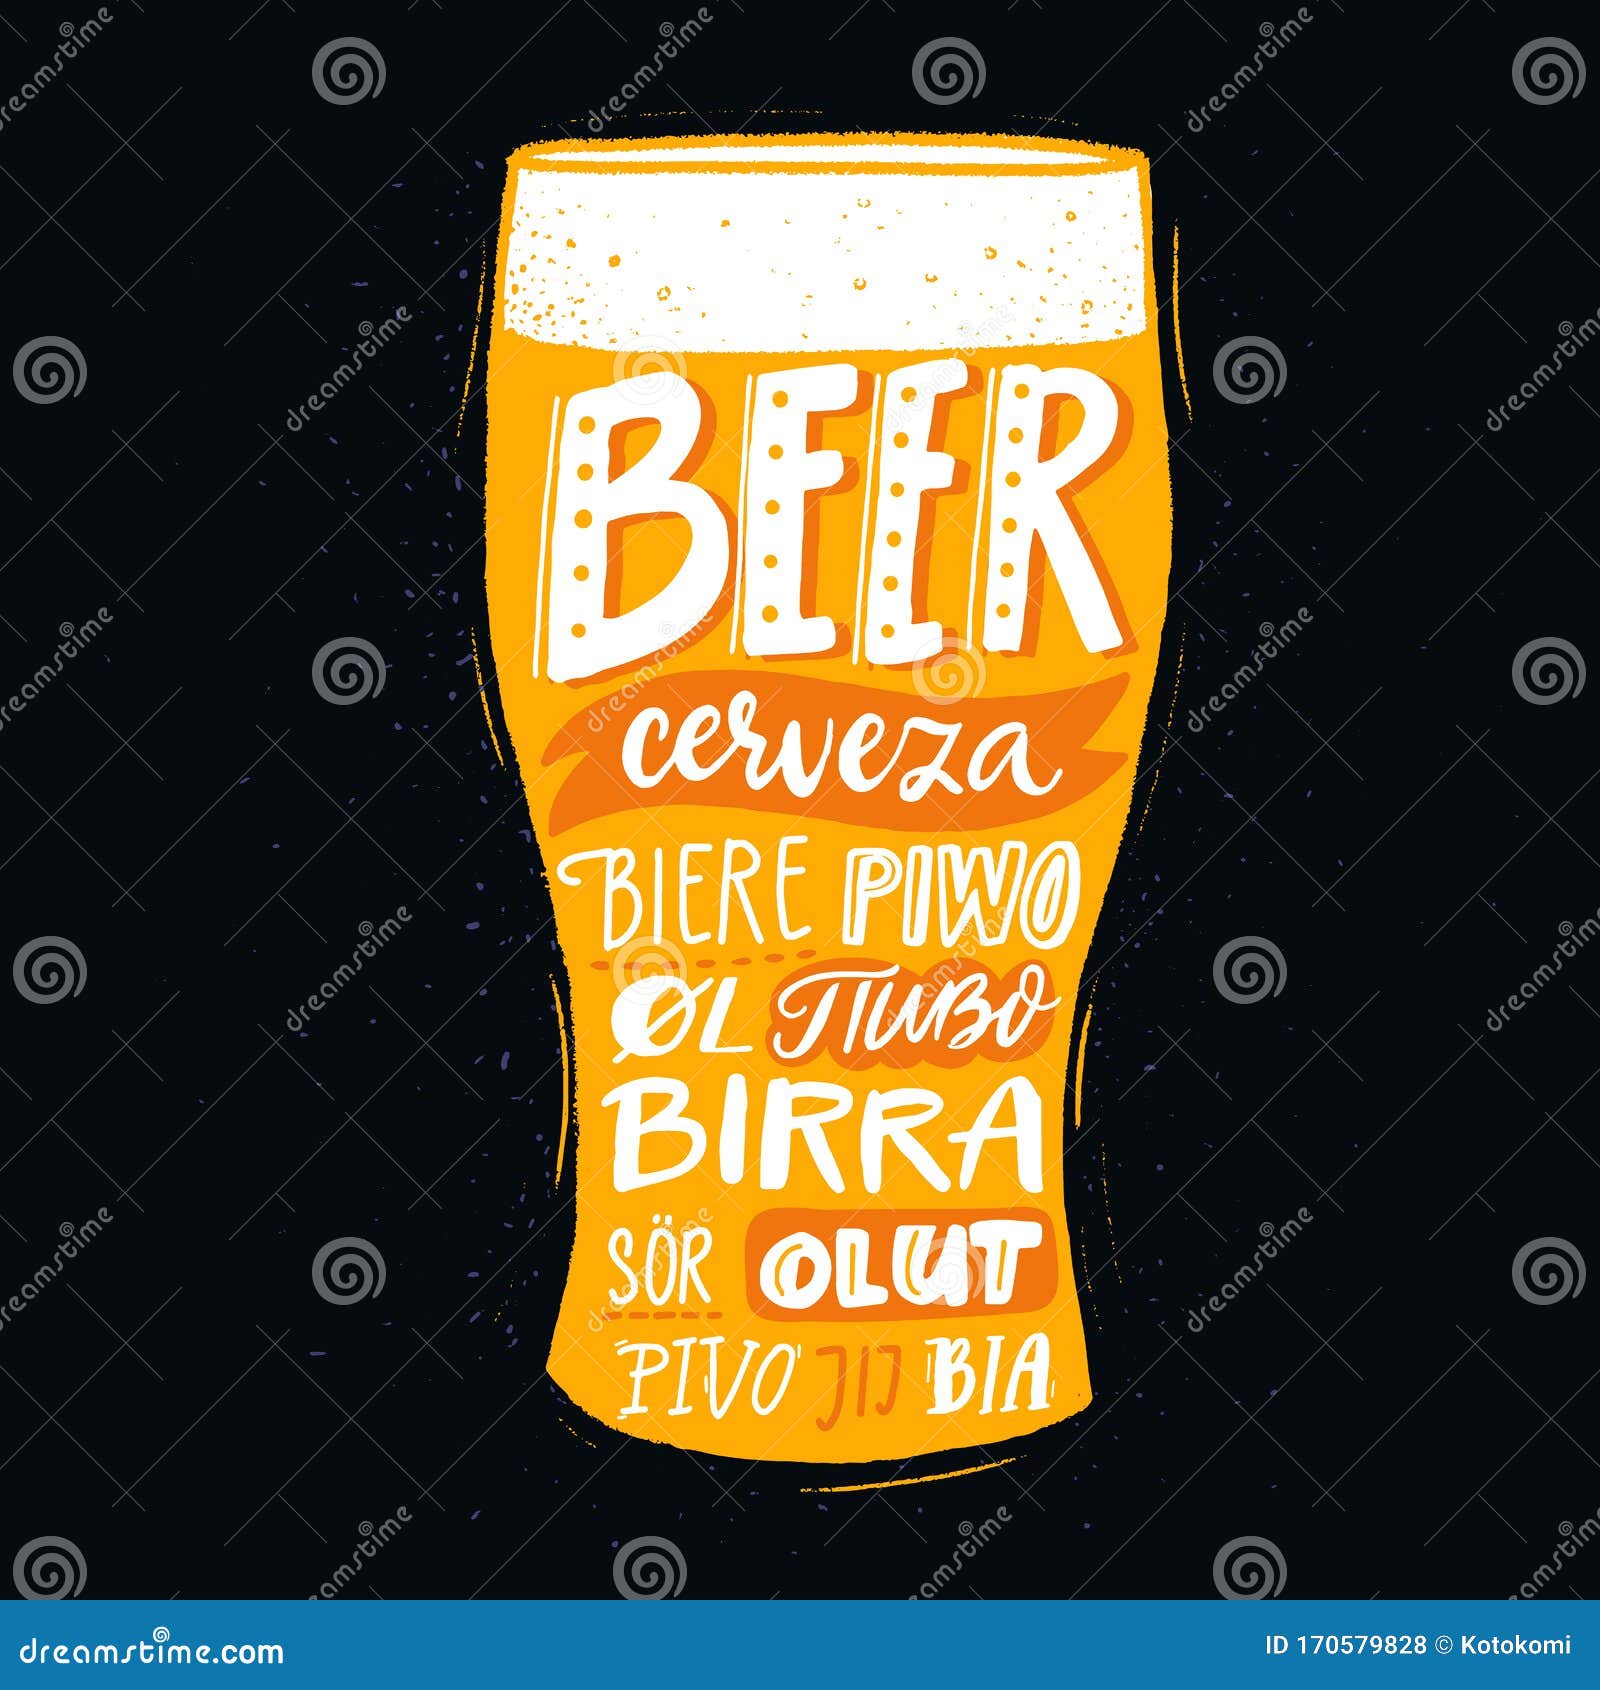 pub poster with beer word in different languages. spanish cerveza, russian pivo, french biere, finnish olut. handwritten